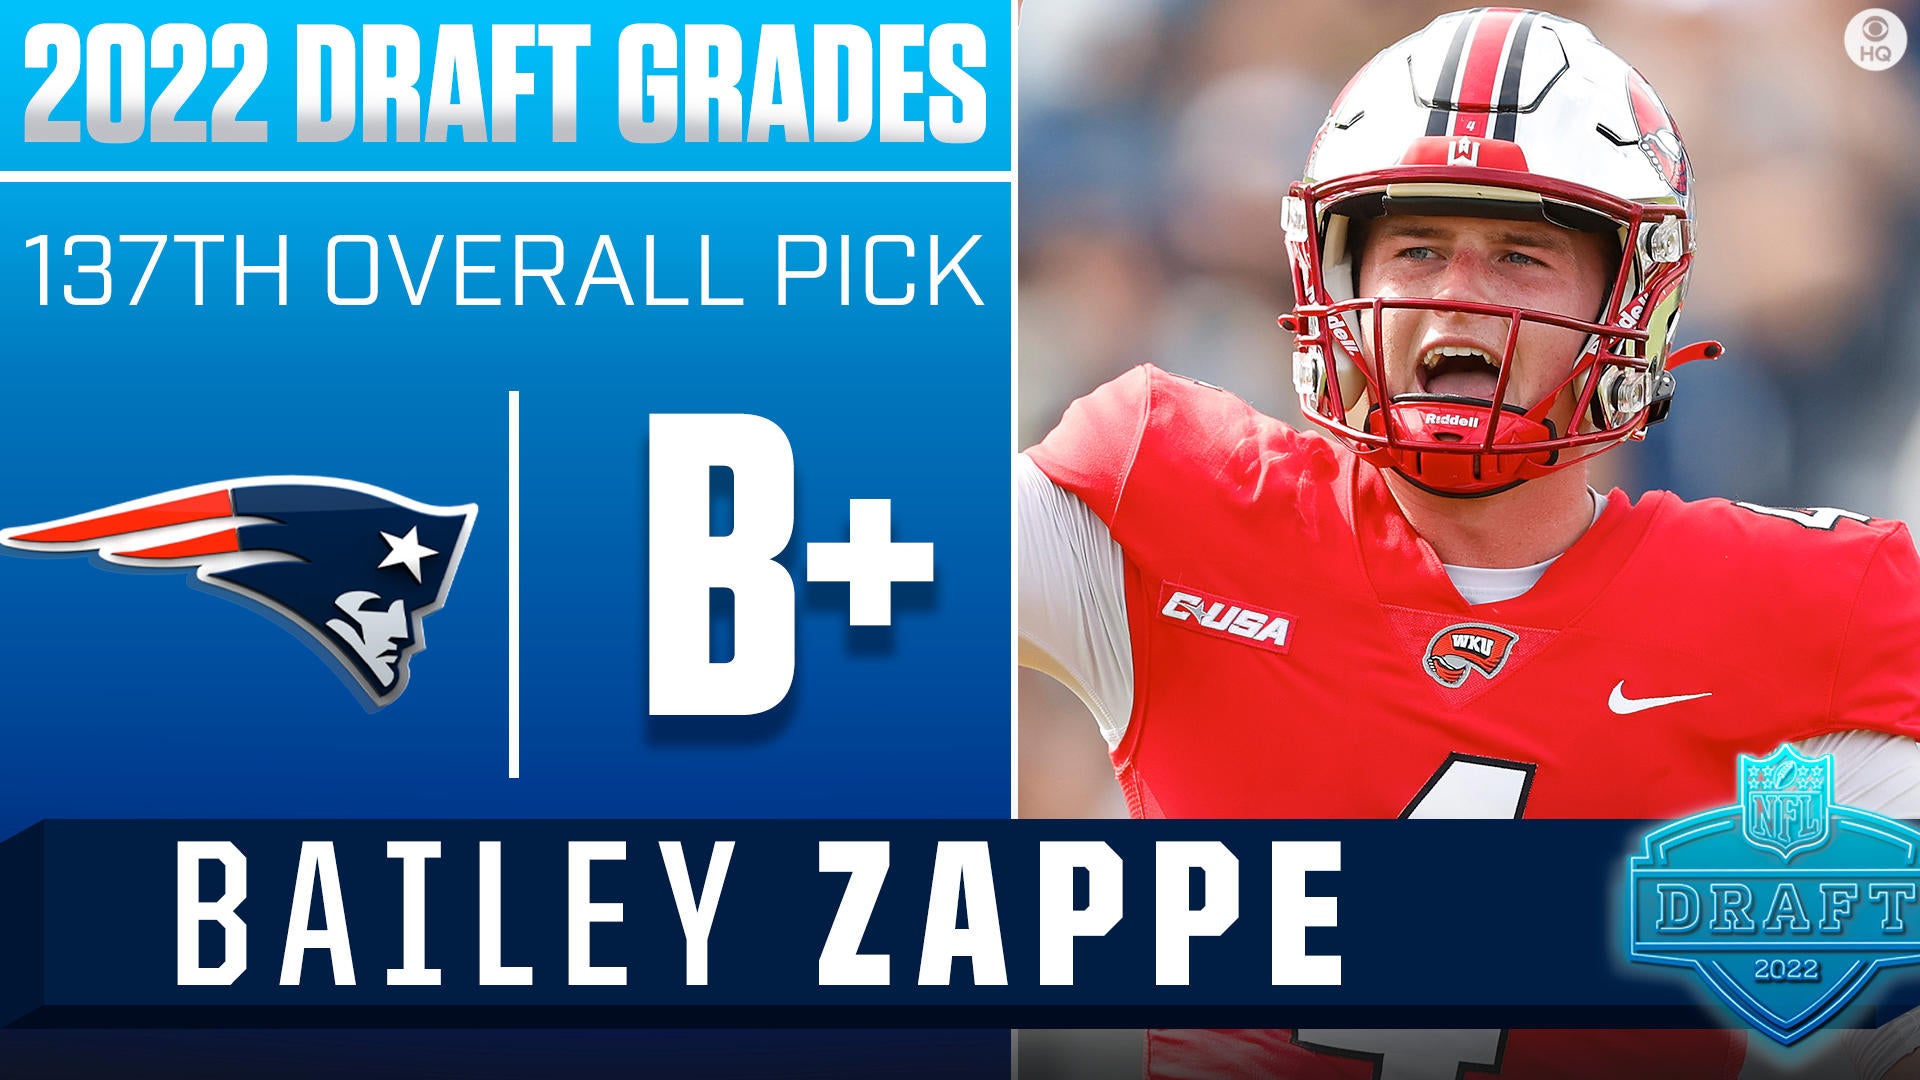 Bailey Zappe - College Football News & Updates